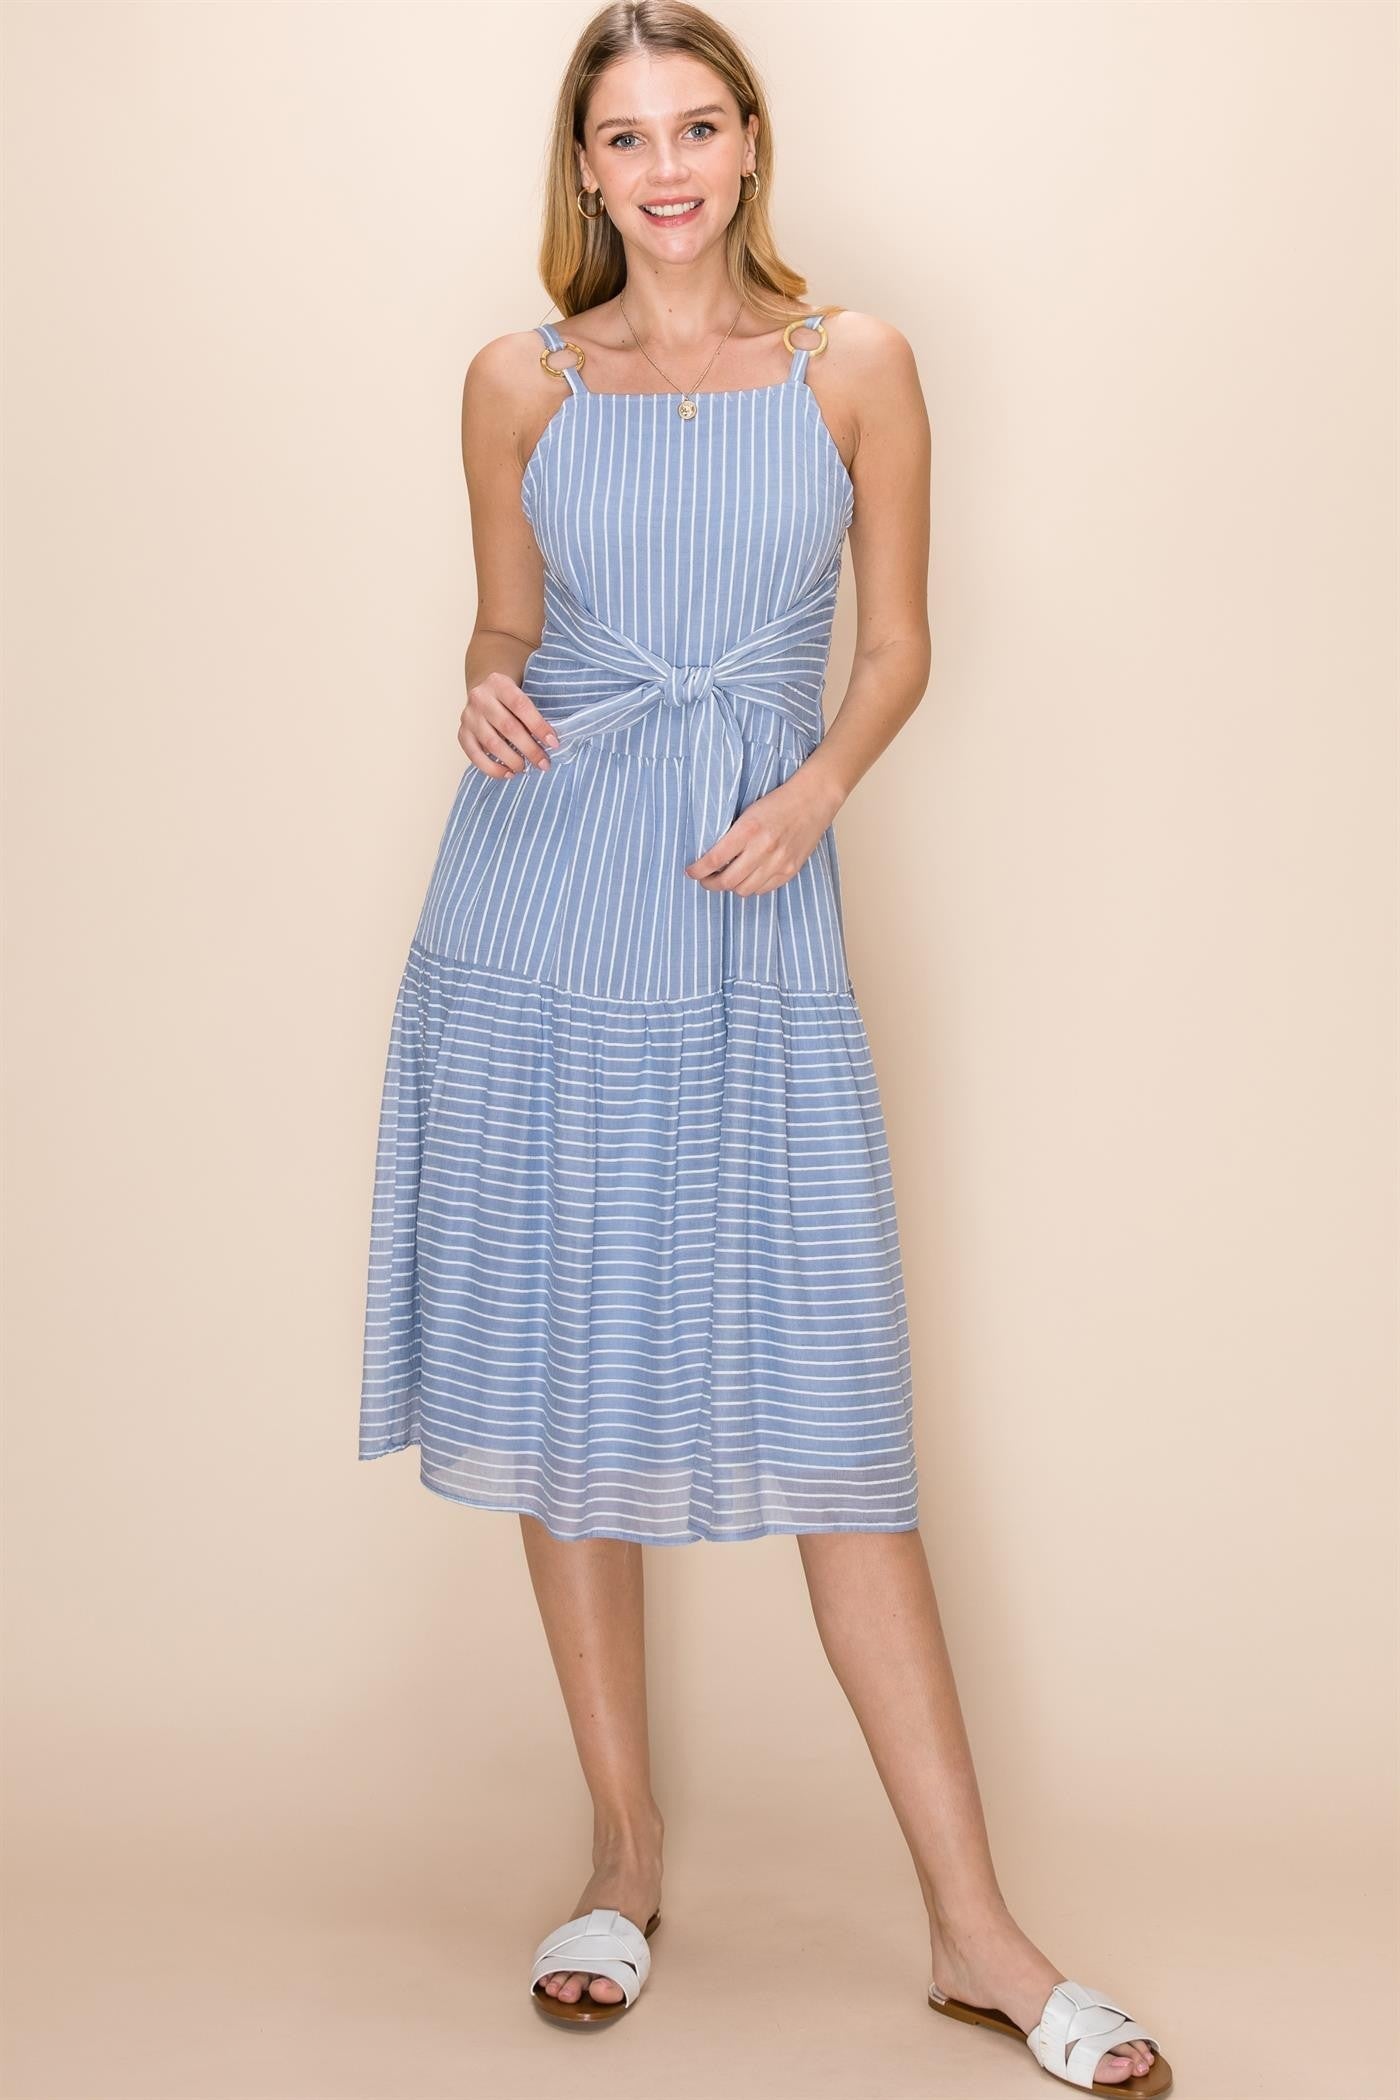 Blue and white striped dress